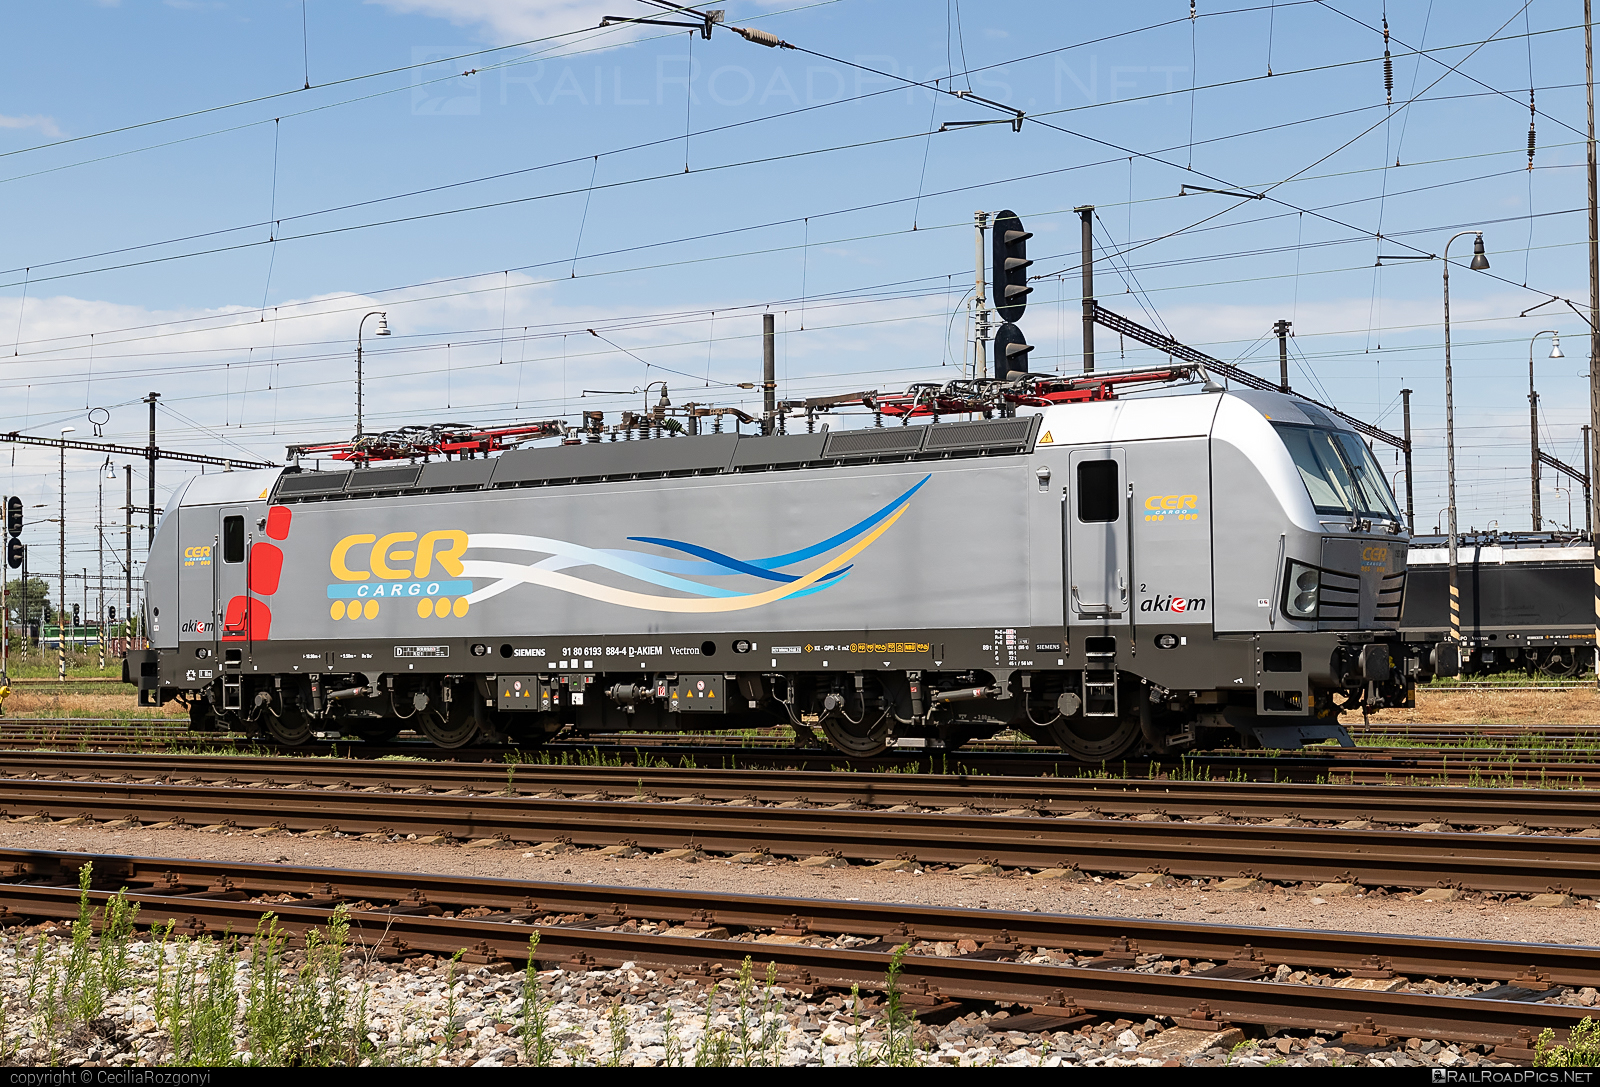 Siemens Vectron MS - 193 884 operated by CER Cargo Holding SE #akiem #akiemsas #cer #cercargoholding #cercargoholdingse #siemens #siemensVectron #siemensVectronMS #vectron #vectronMS